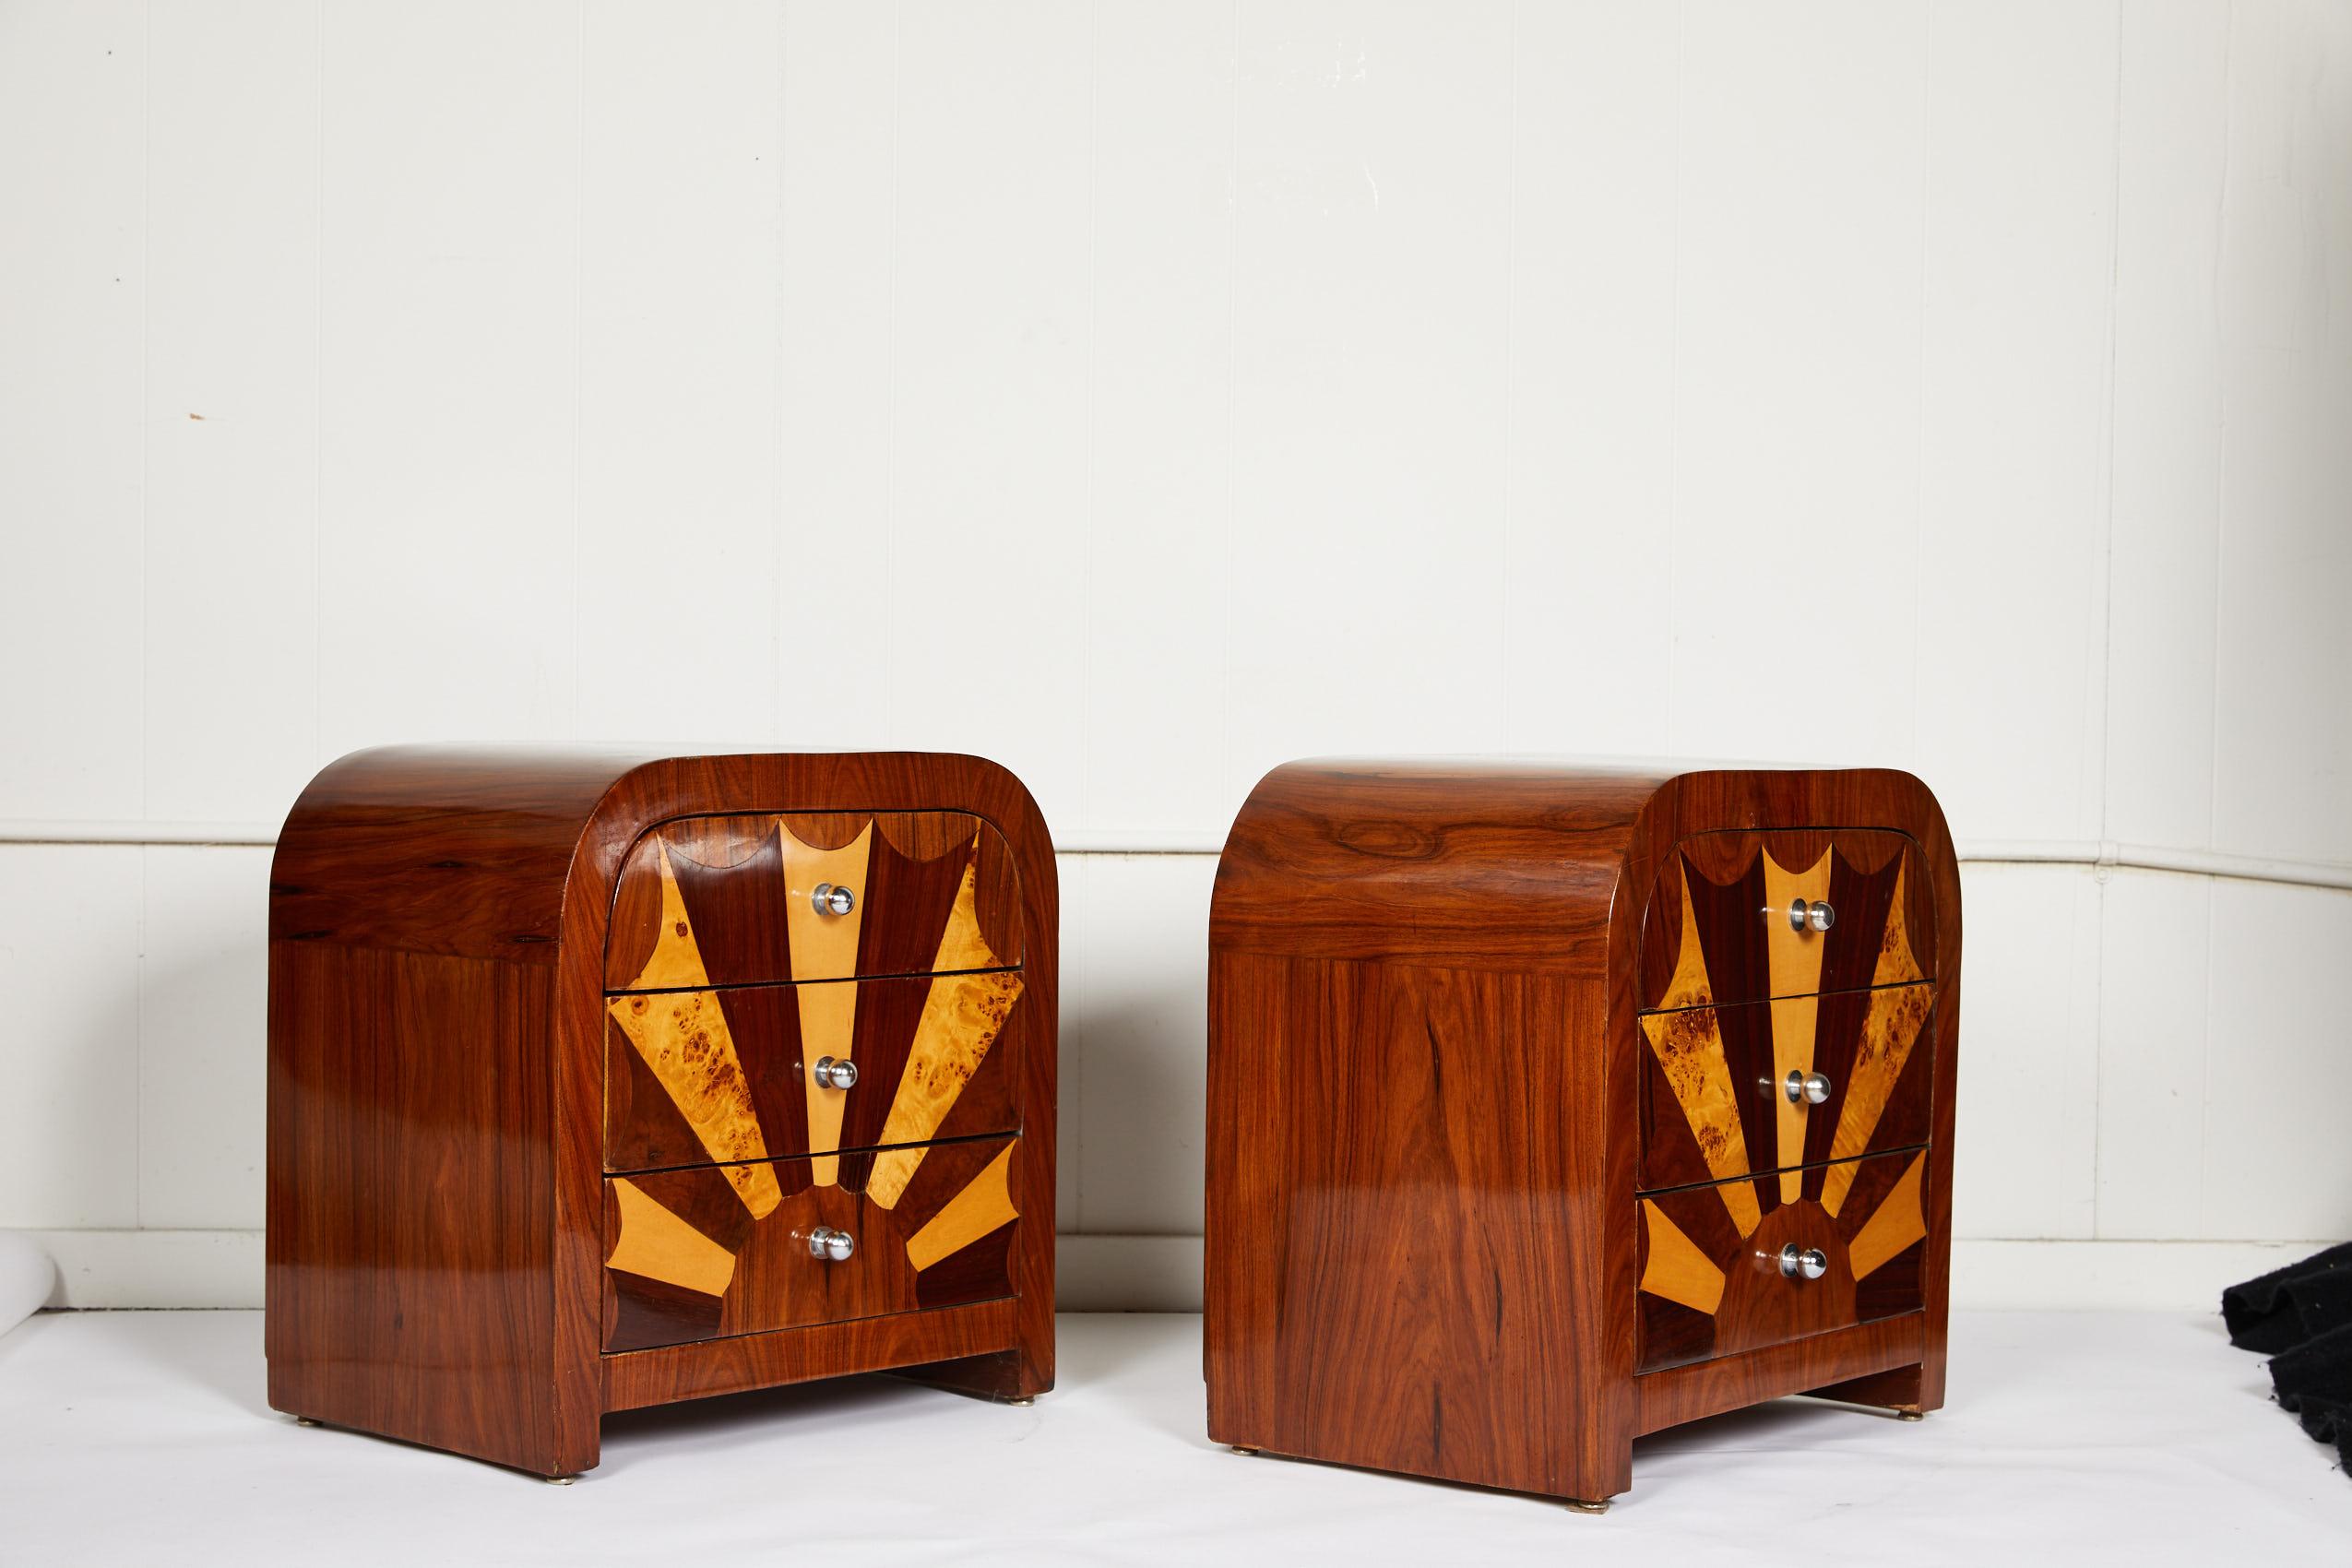 Pair of fine quality midcentury Italian veneered side tables or nightstands of rosewood containing three graduated drawers with fan inlay of Birdseye maple and mahogany. The vintage tables are beautifully finished on all sides and inside the drawers.